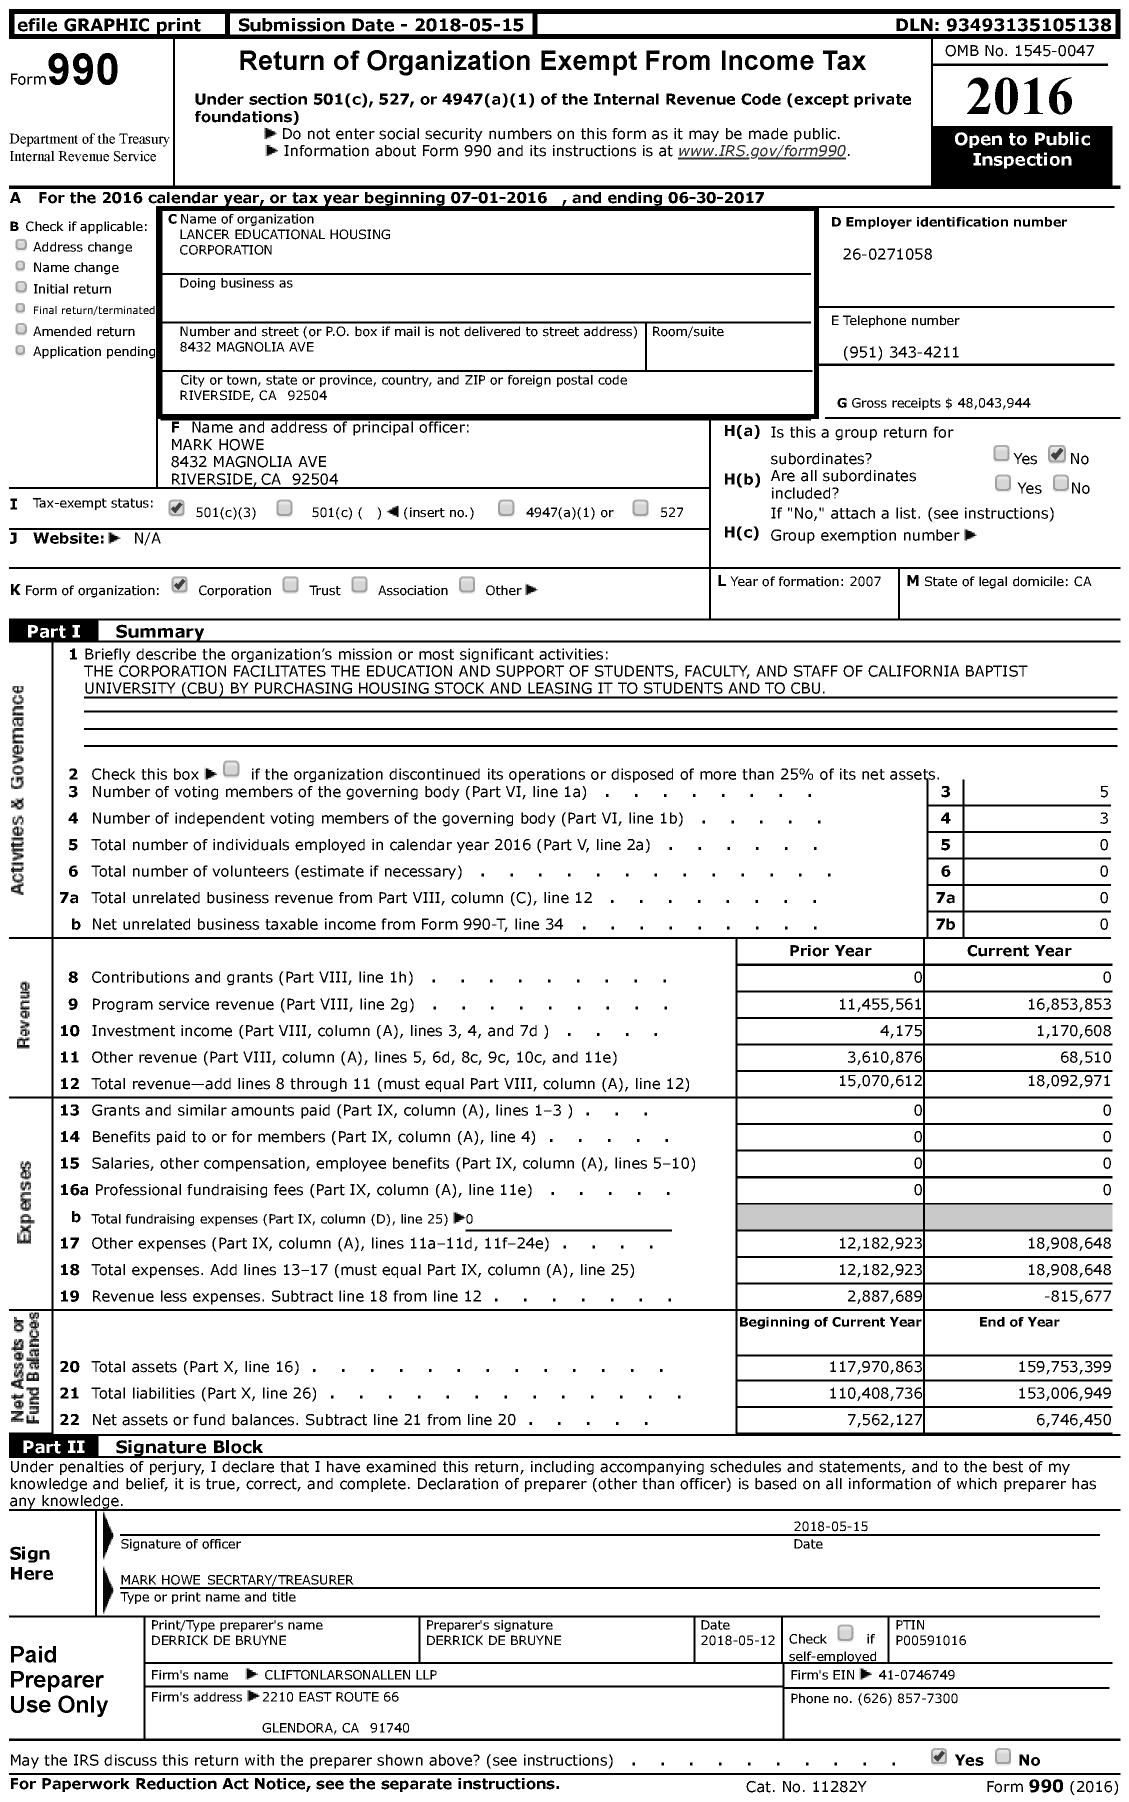 Image of first page of 2016 Form 990 for Lancer Educational Housing Corporation